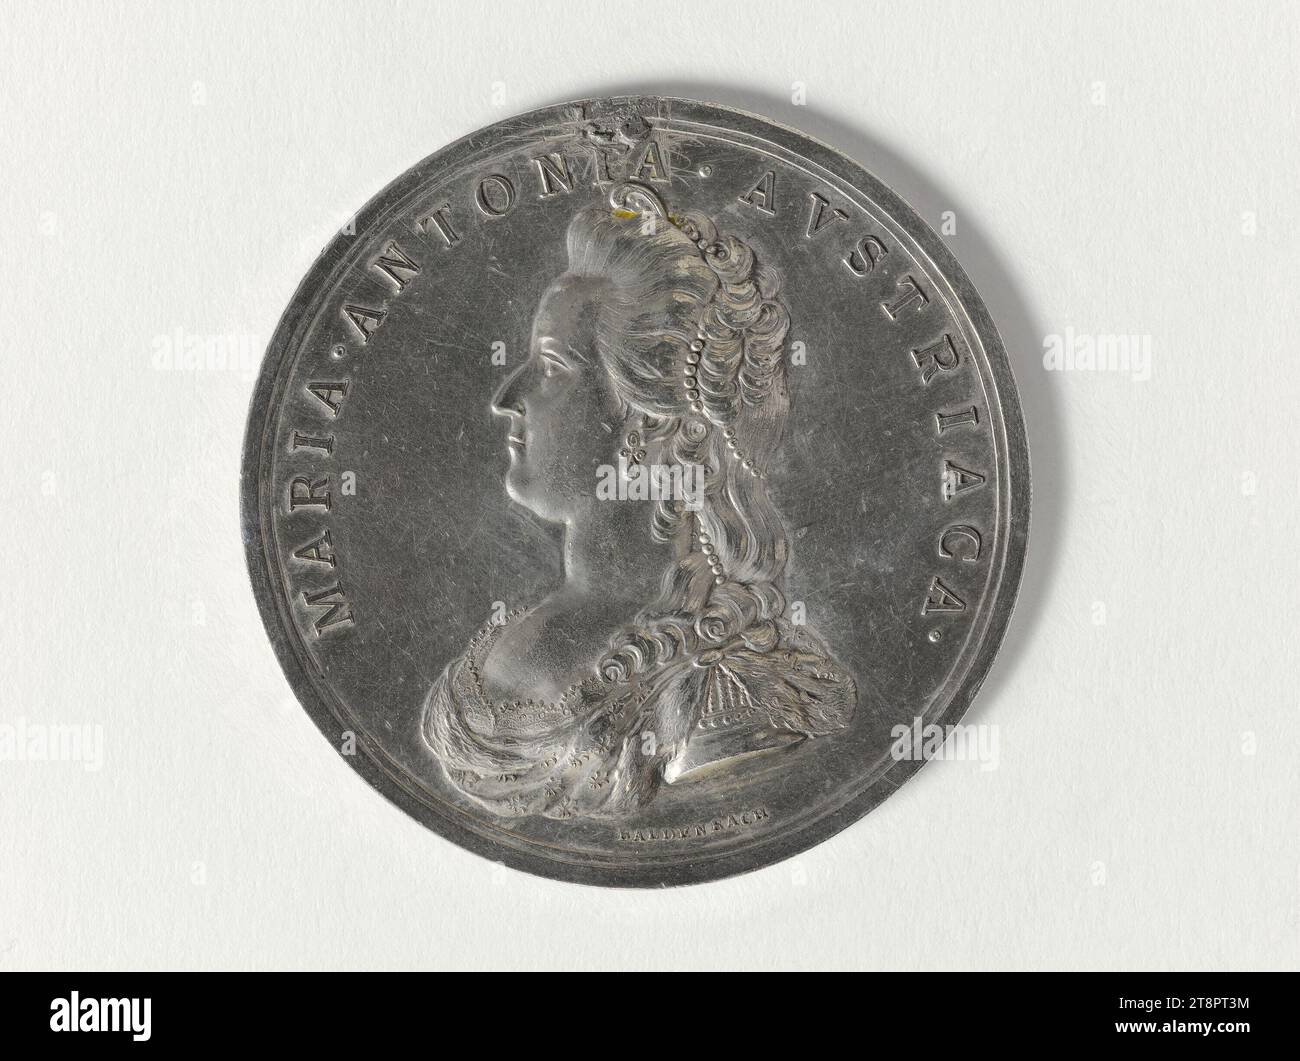 Commemoration of the execution of Marie-Antoinette, October 16, 1793, Baldenbach, Peter, Engraver, Array, Numismatic, Medal, Dimensions - Work: Diameter: 4.7 cm, Weight (type size): 26.31 g Stock Photo